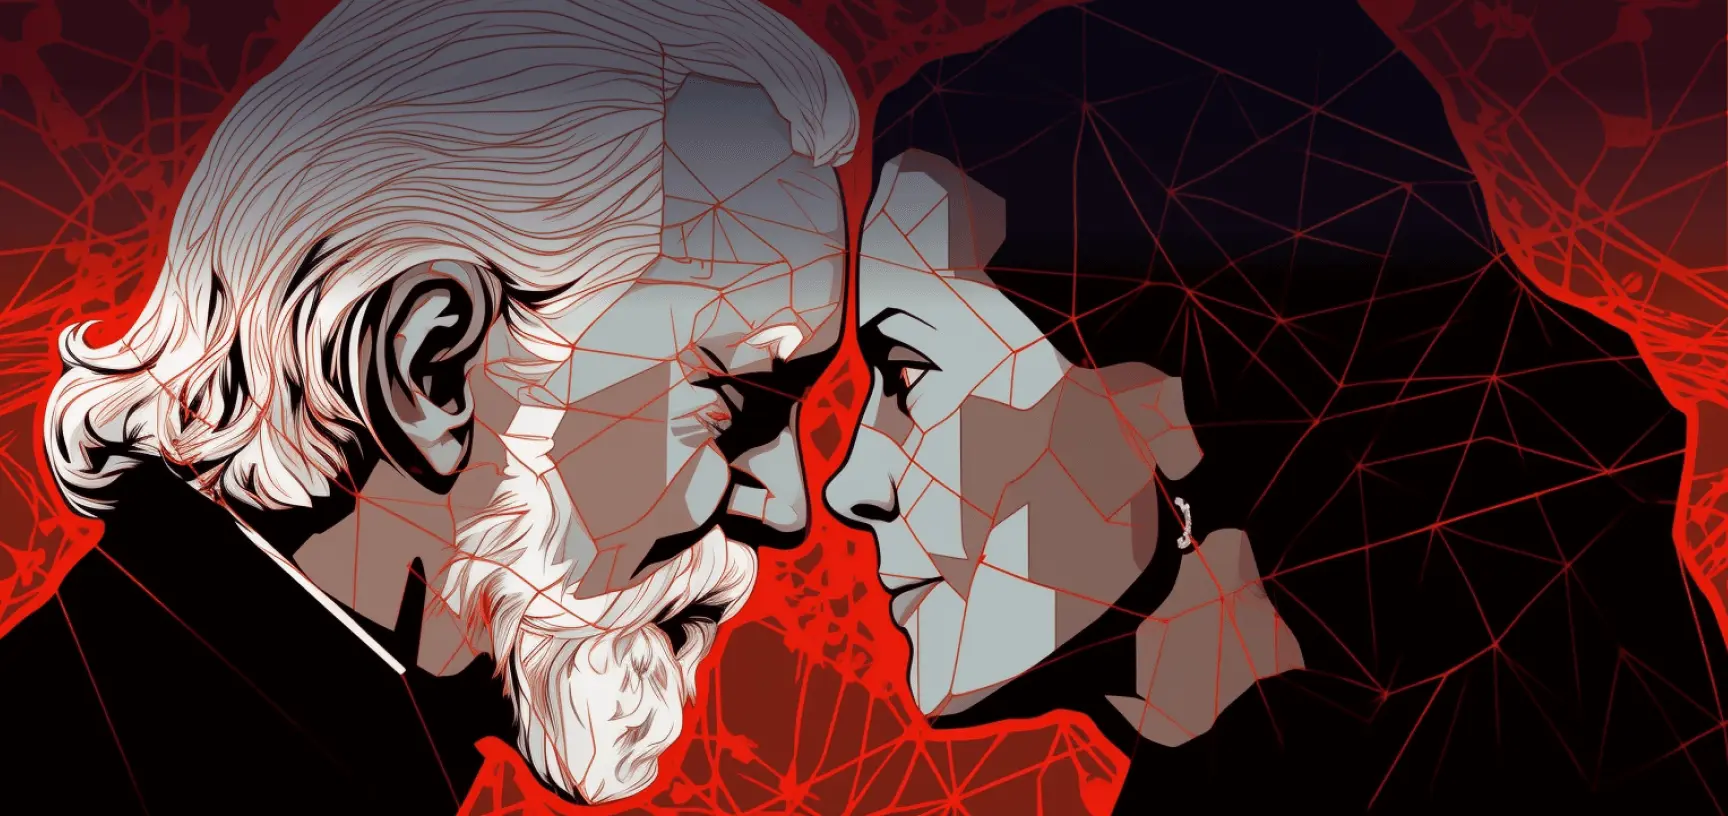 Alexander Shulgin and Anne shulgin looking at each other Illustration